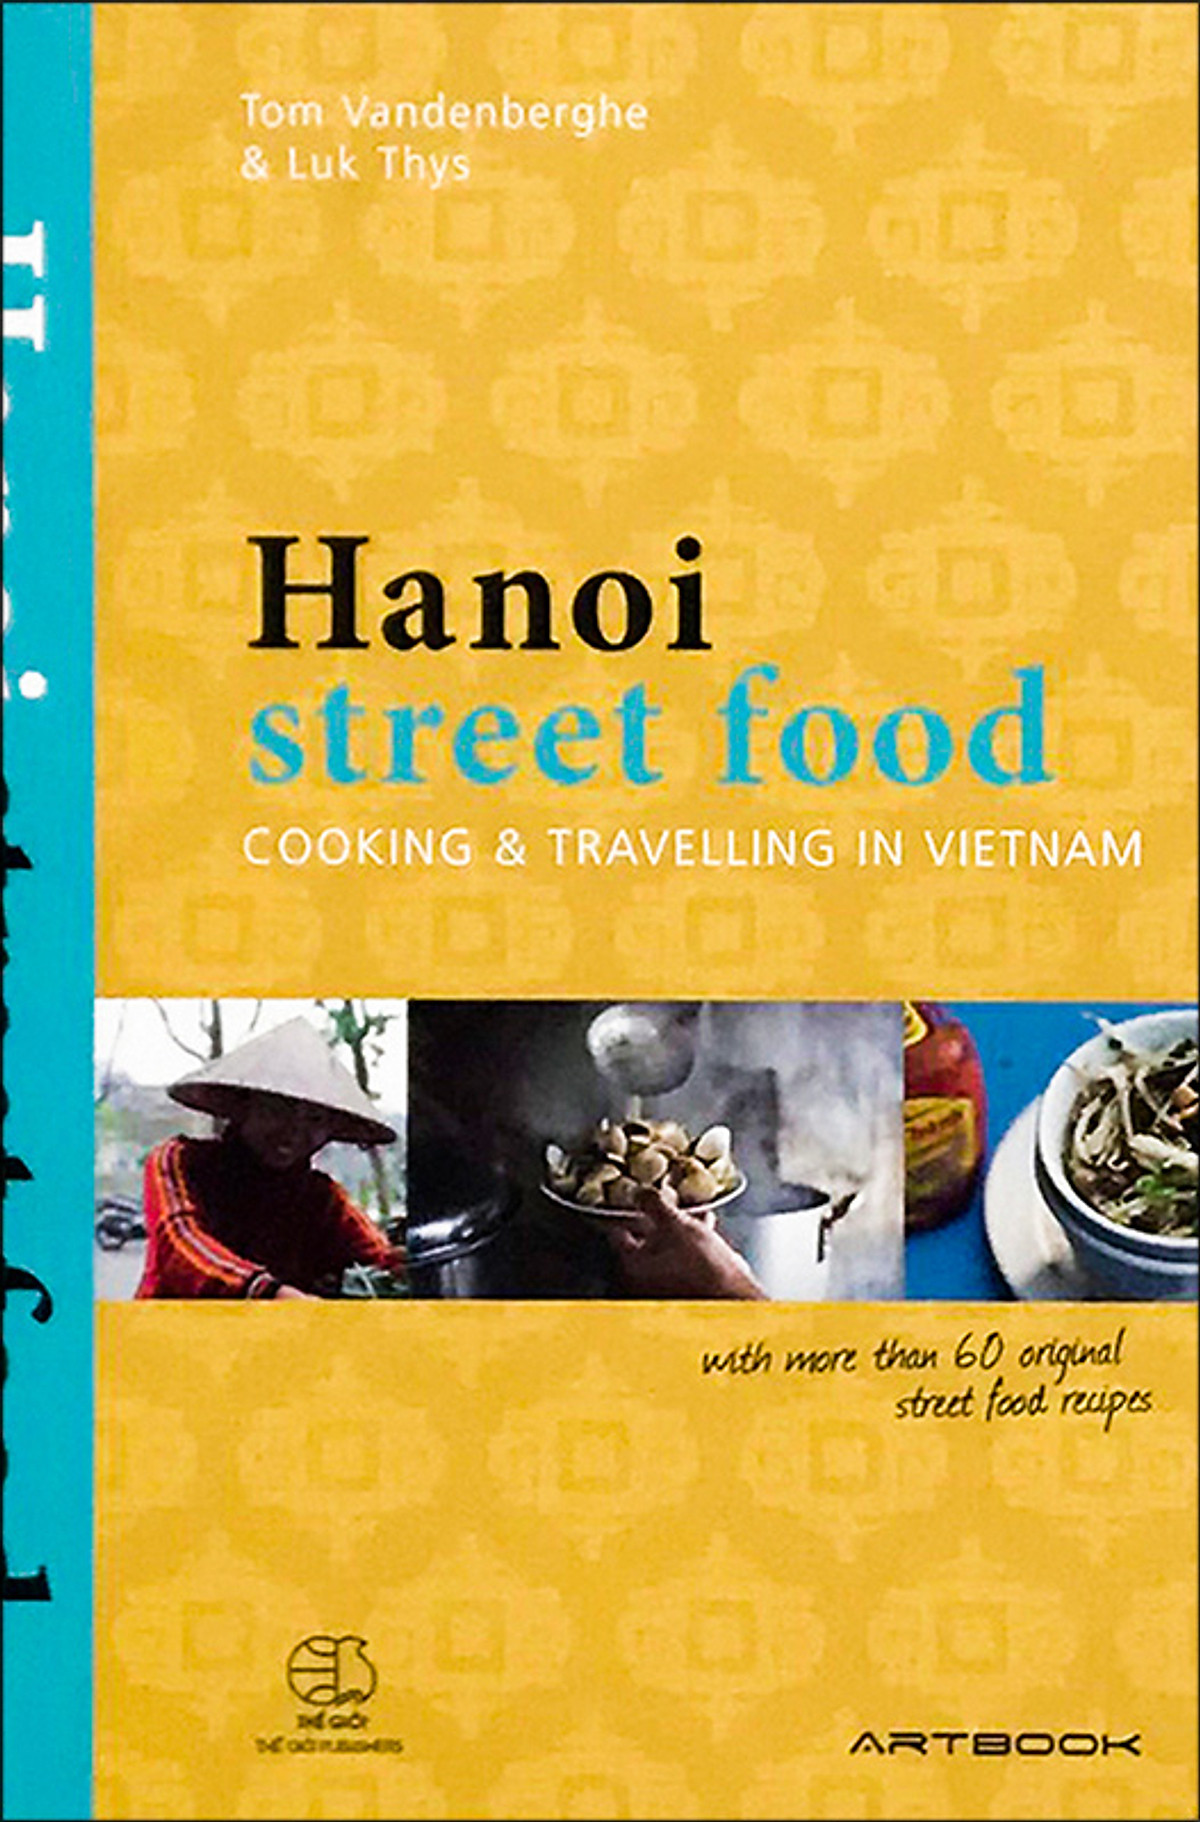 Hanoi Street Food: Cooking And Travelling In Viet Nam (With More Than 60 Original Street Food Recipes)